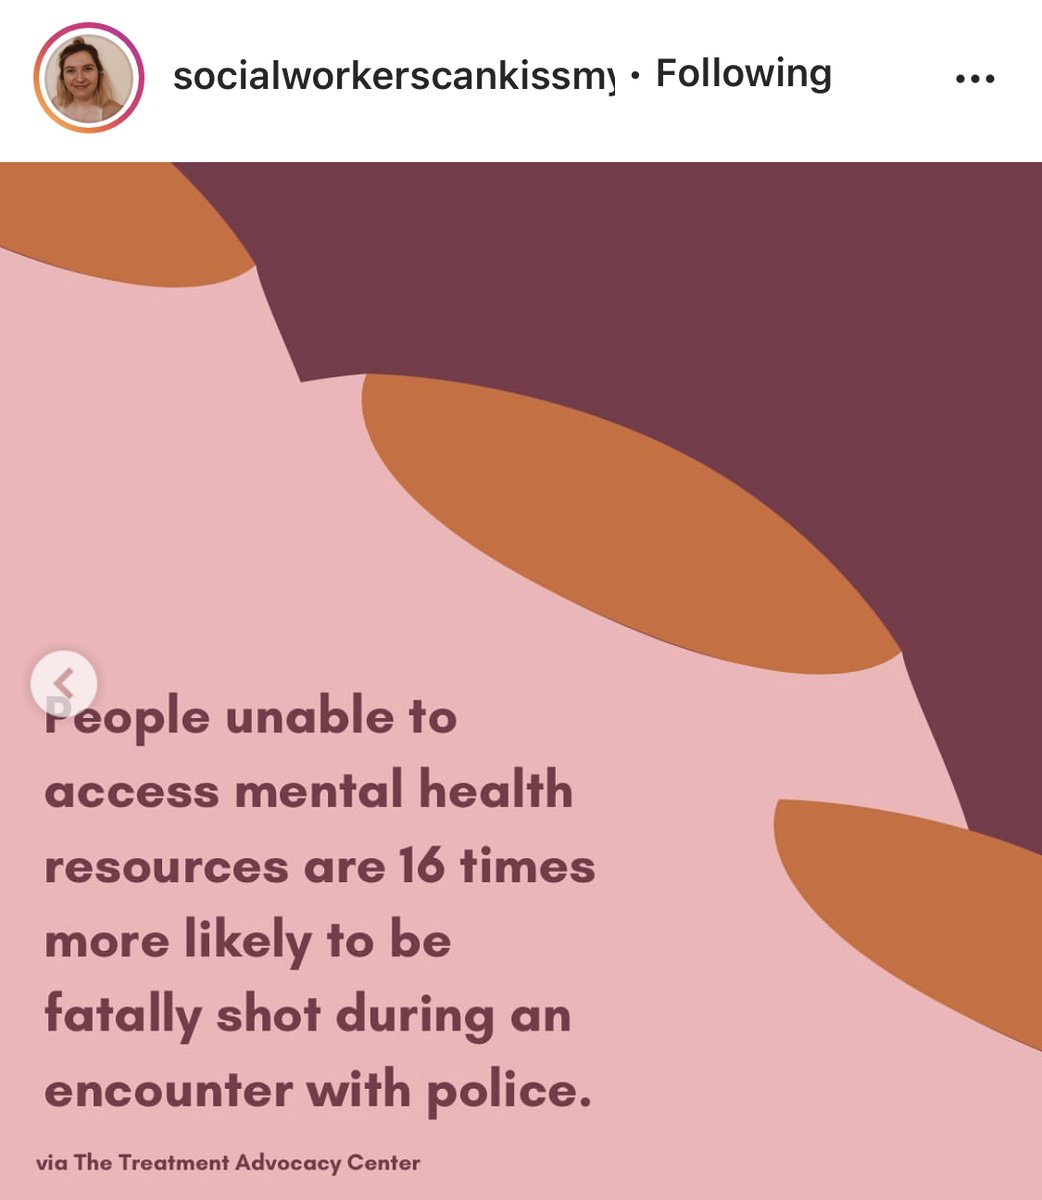 SLIDE 2: 1 in 4 people murdered by police are experiencing a mental health crisis at the time they are murdered. SLIDE 3: People unable to access mental health resources are 16 times more likely to be fatally shot during an encounter with the police. 14/